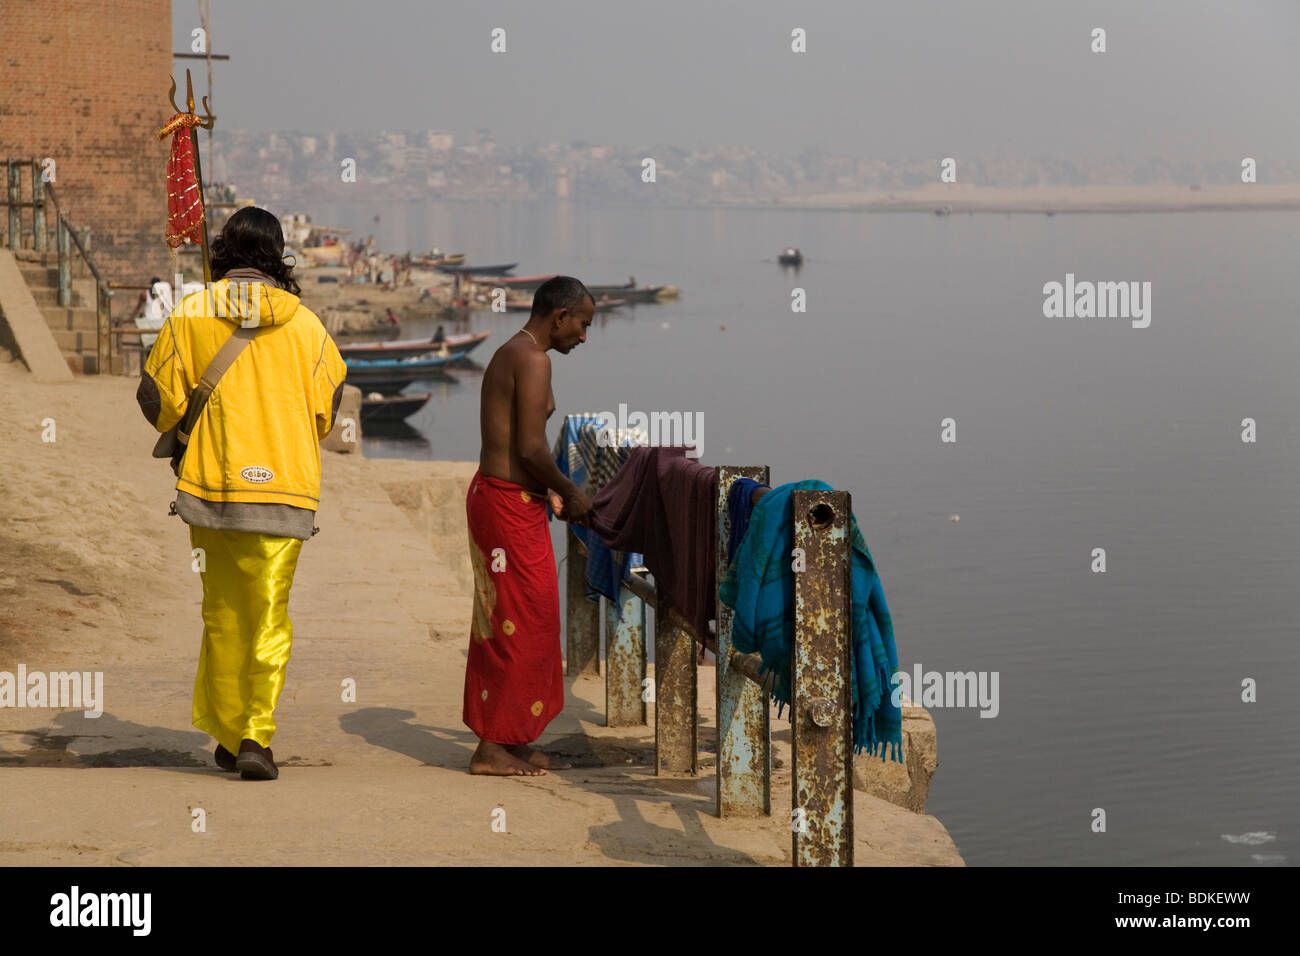 A Sadhu walks along the riverside in the city of Varanasi (Benares). The Sadhu holds a trident, the other man wears a dhoti. Stock Photo